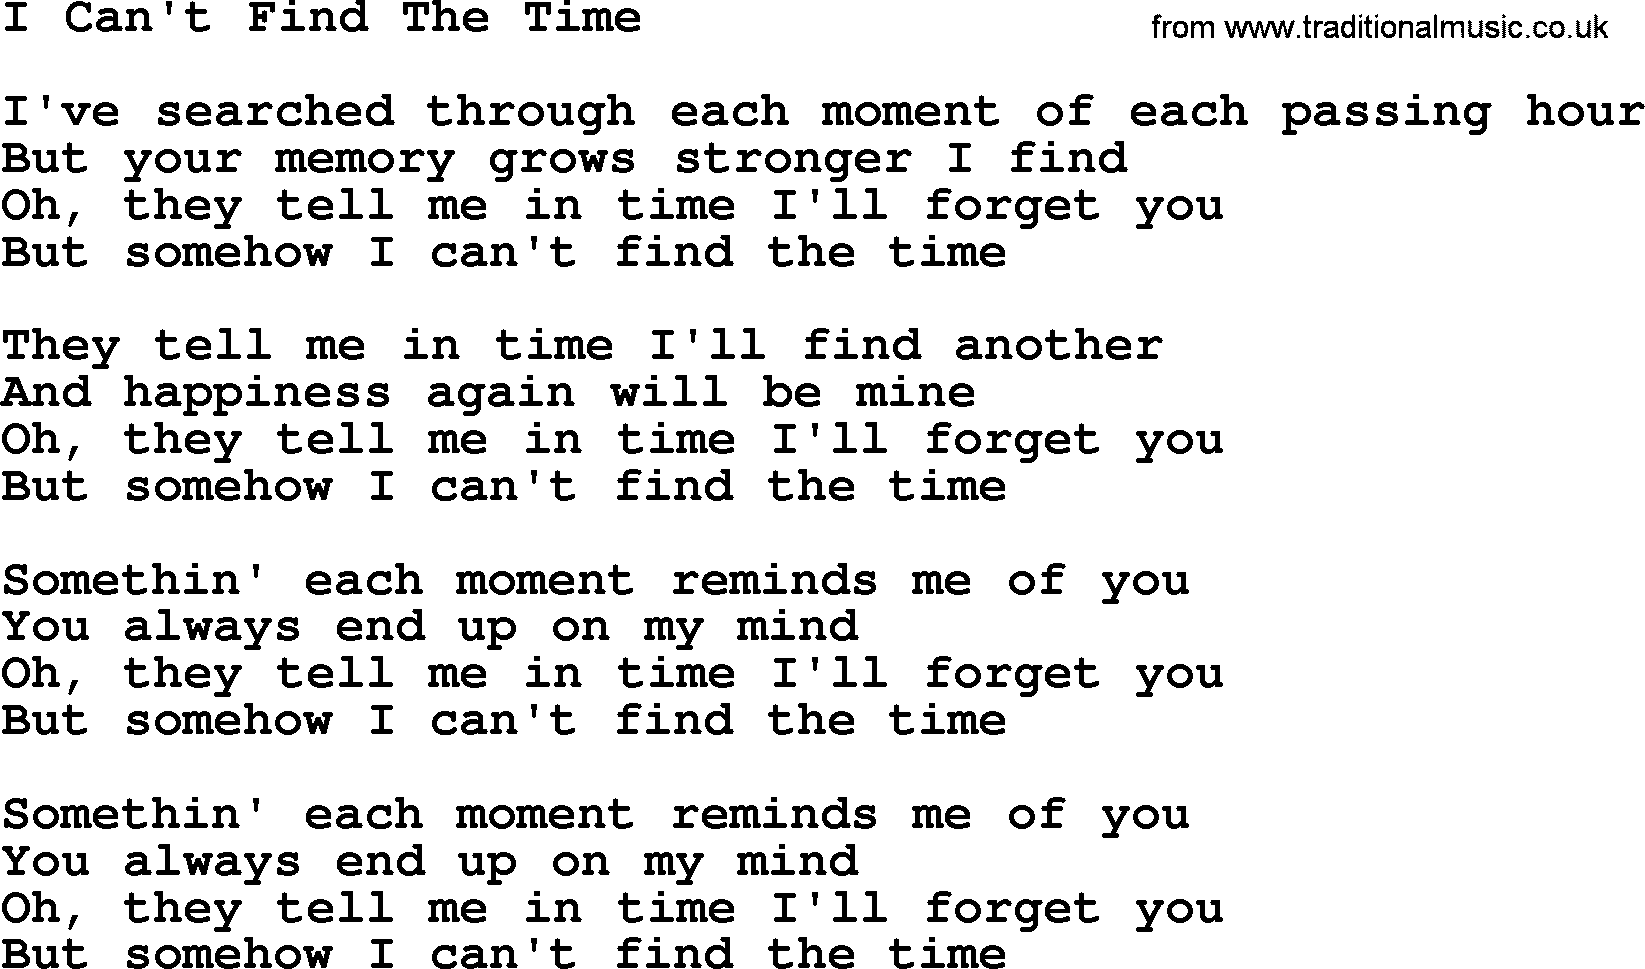 Willie Nelson song: I Can't Find The Time lyrics